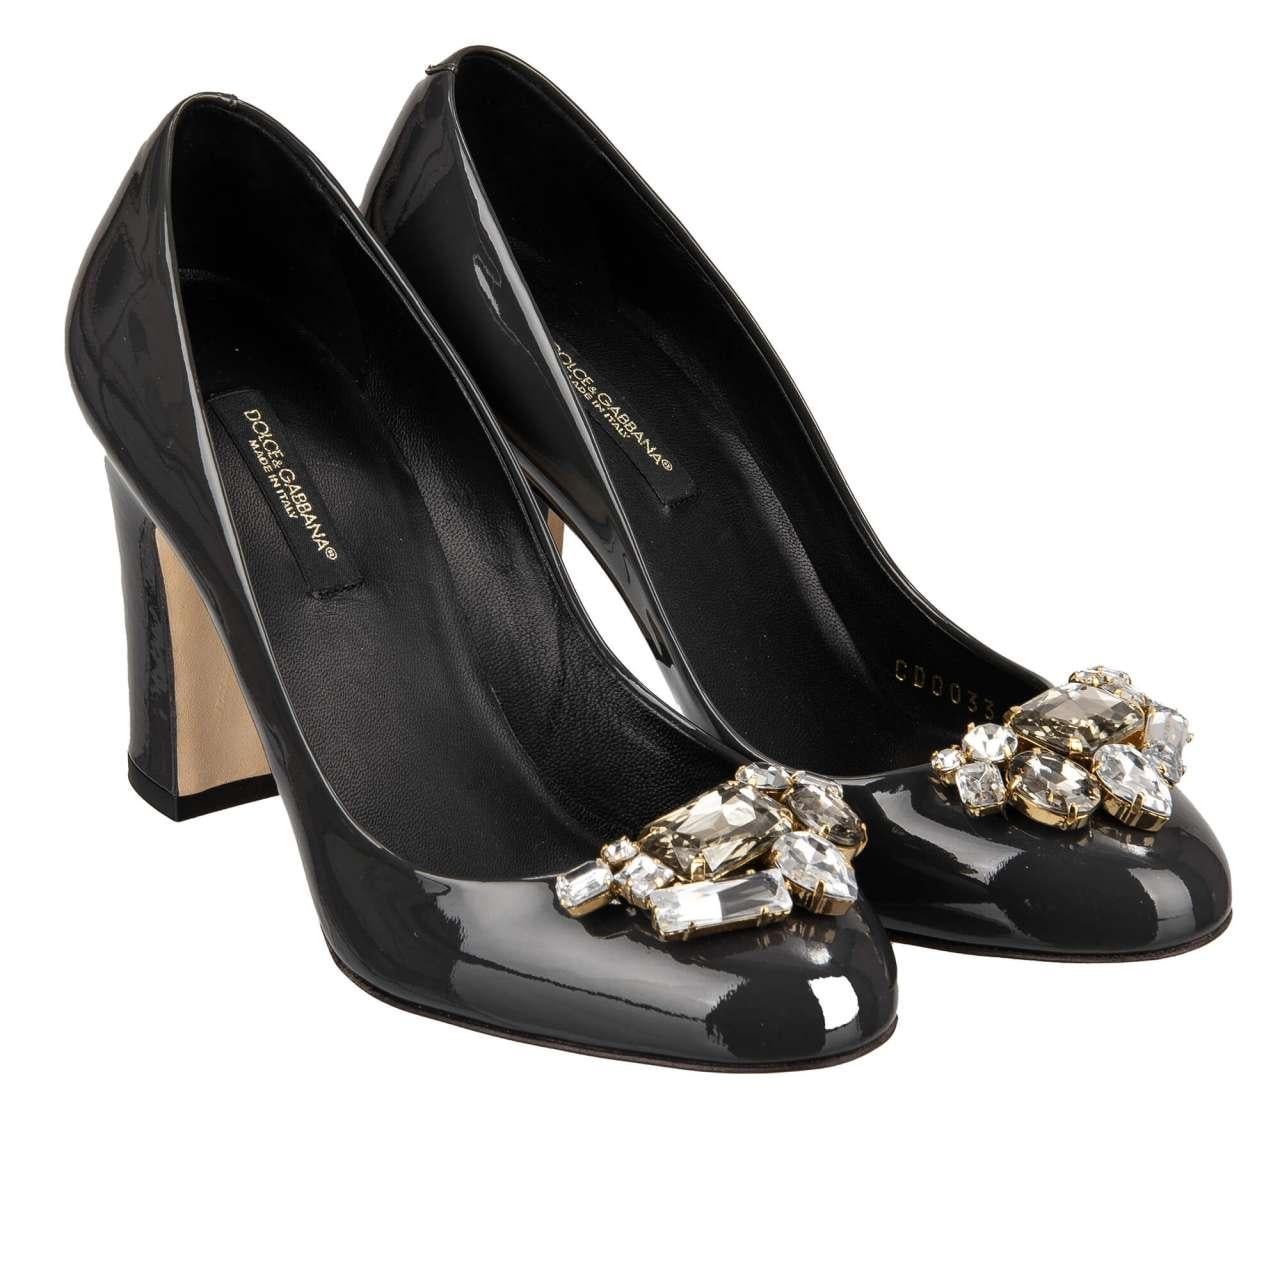 - Patent leather Pumps VALLY with crystal brooch in dark gray by DOLCE & GABBANA - New with Box - MADE IN ITALY - Model: CD0033-B1842-8H712 - Material: 100% Calfskin - Inner Material: leather - Sole: Leather - Color: Dark Gray - Heel height: appr. 9